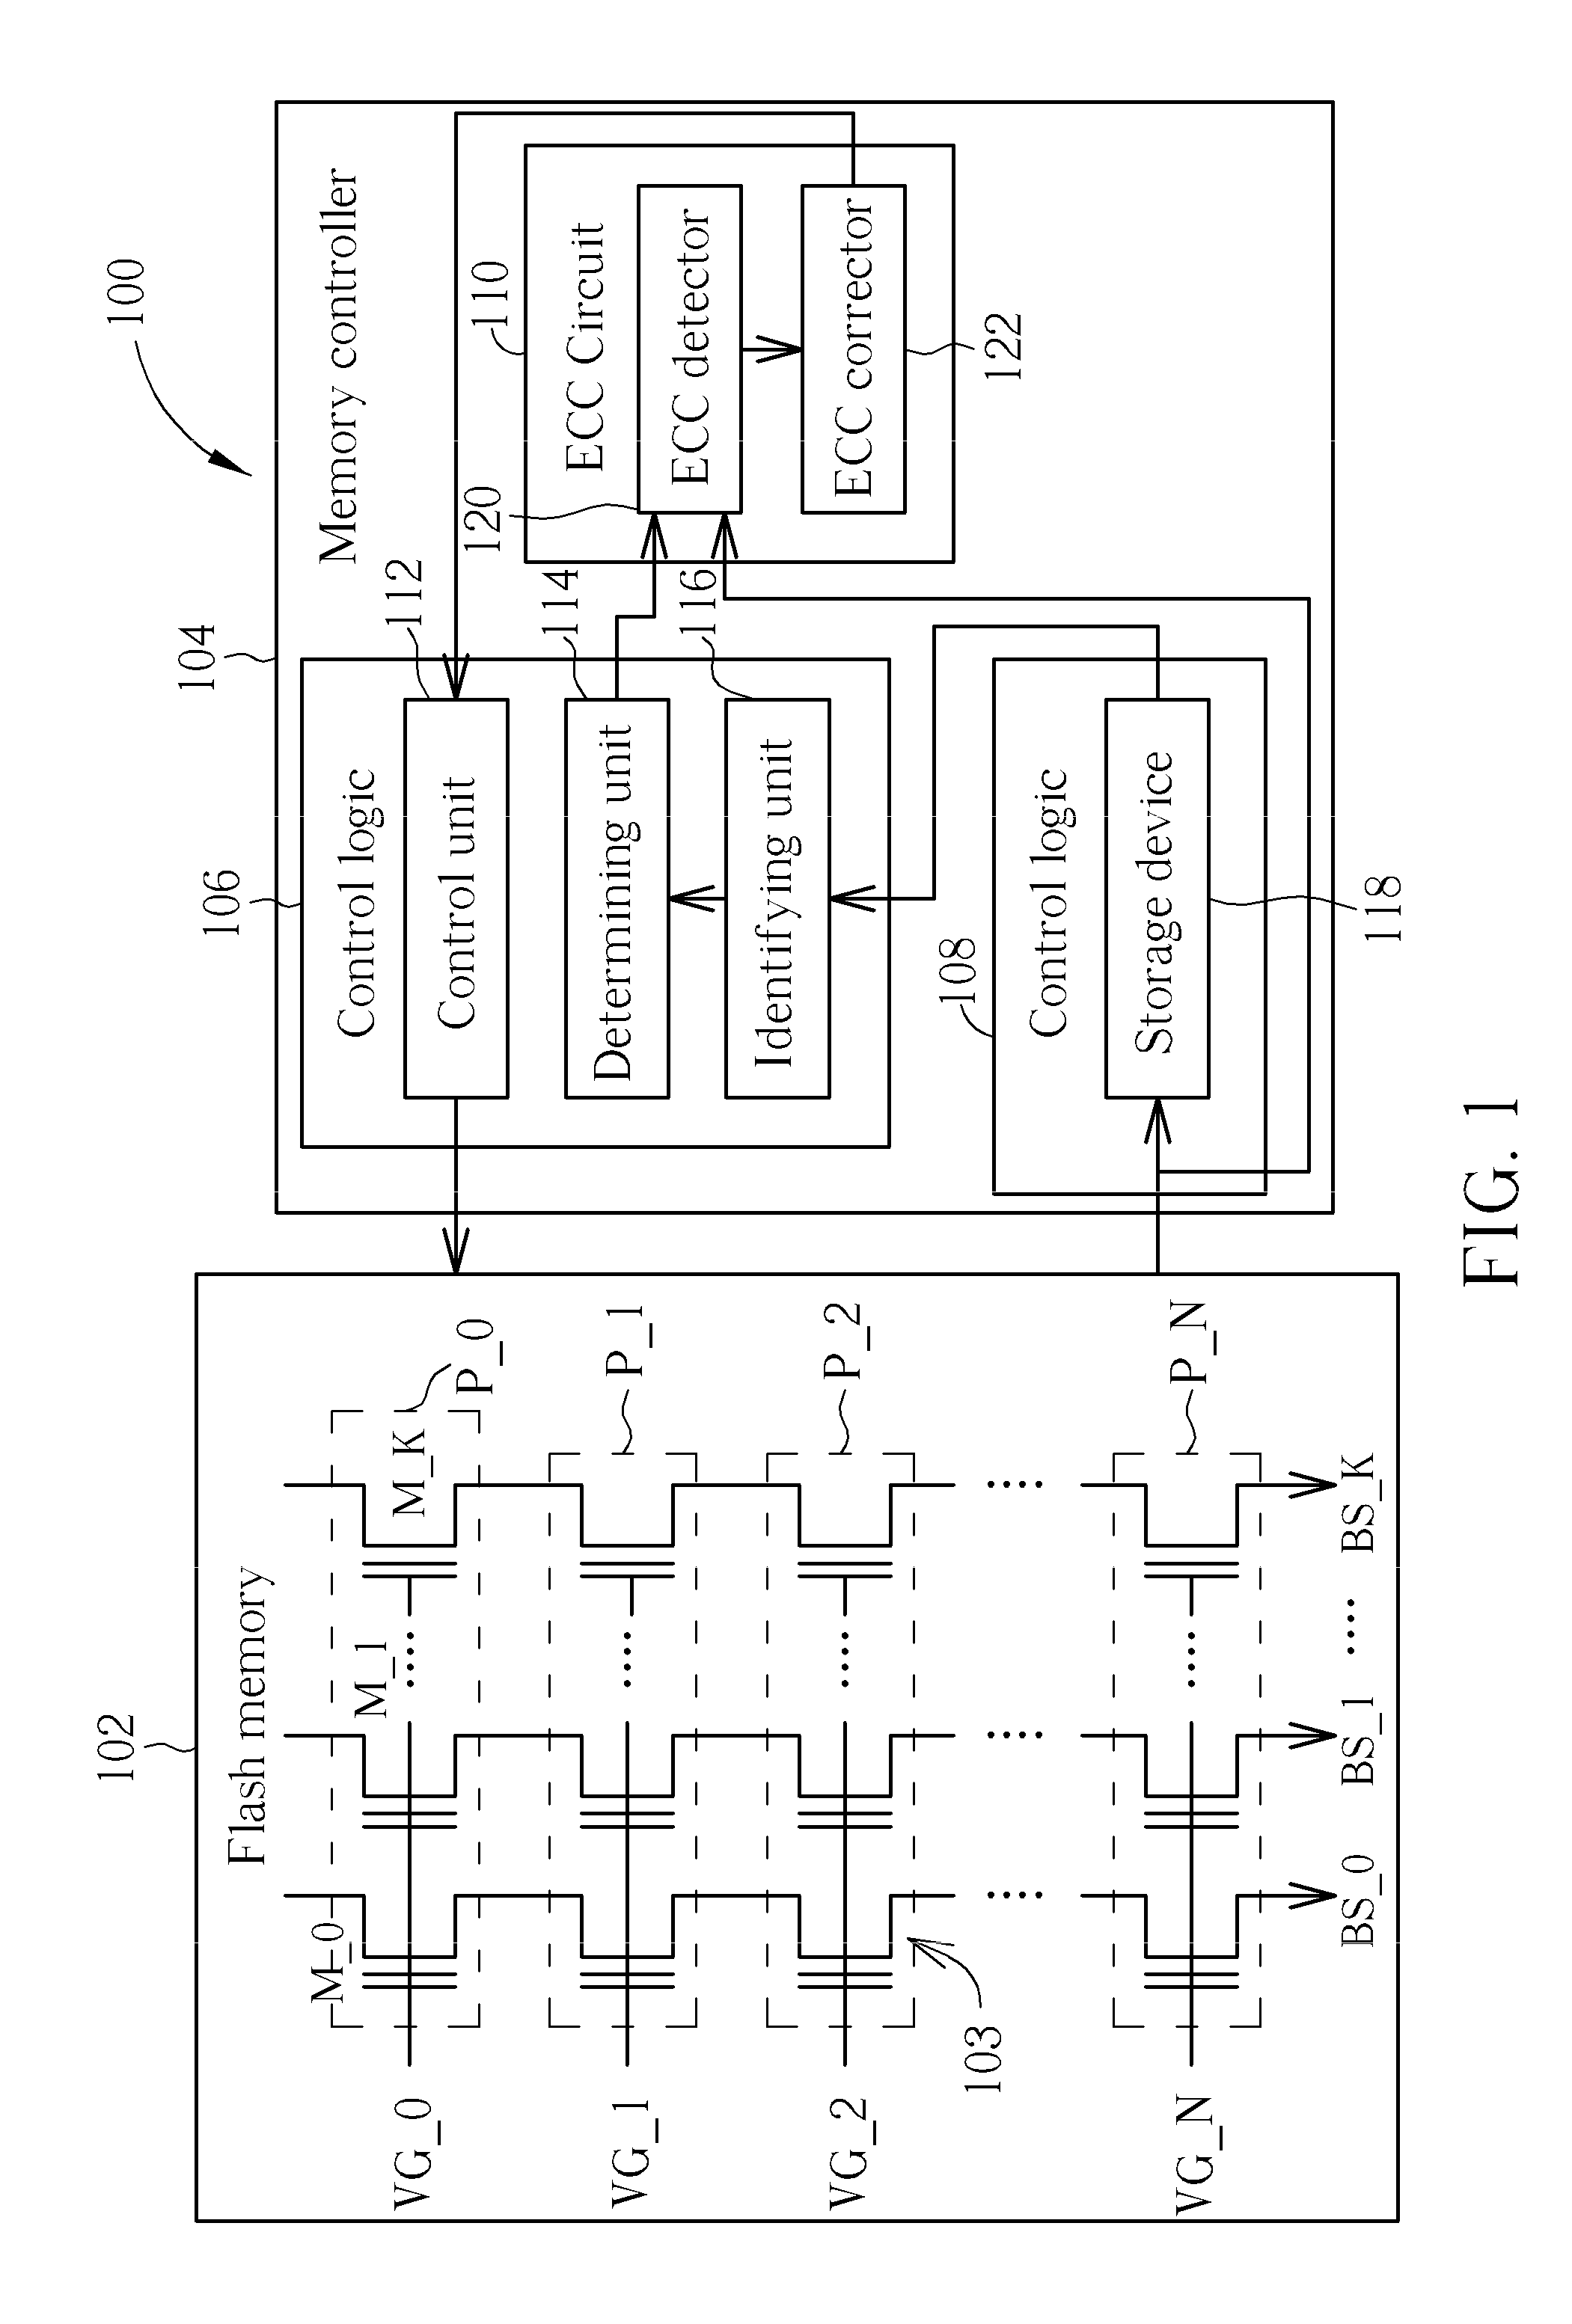 Method and memory controller for reading data stored in flash memory by referring to binary digit distribution characteristics of bit sequences read from flash memory